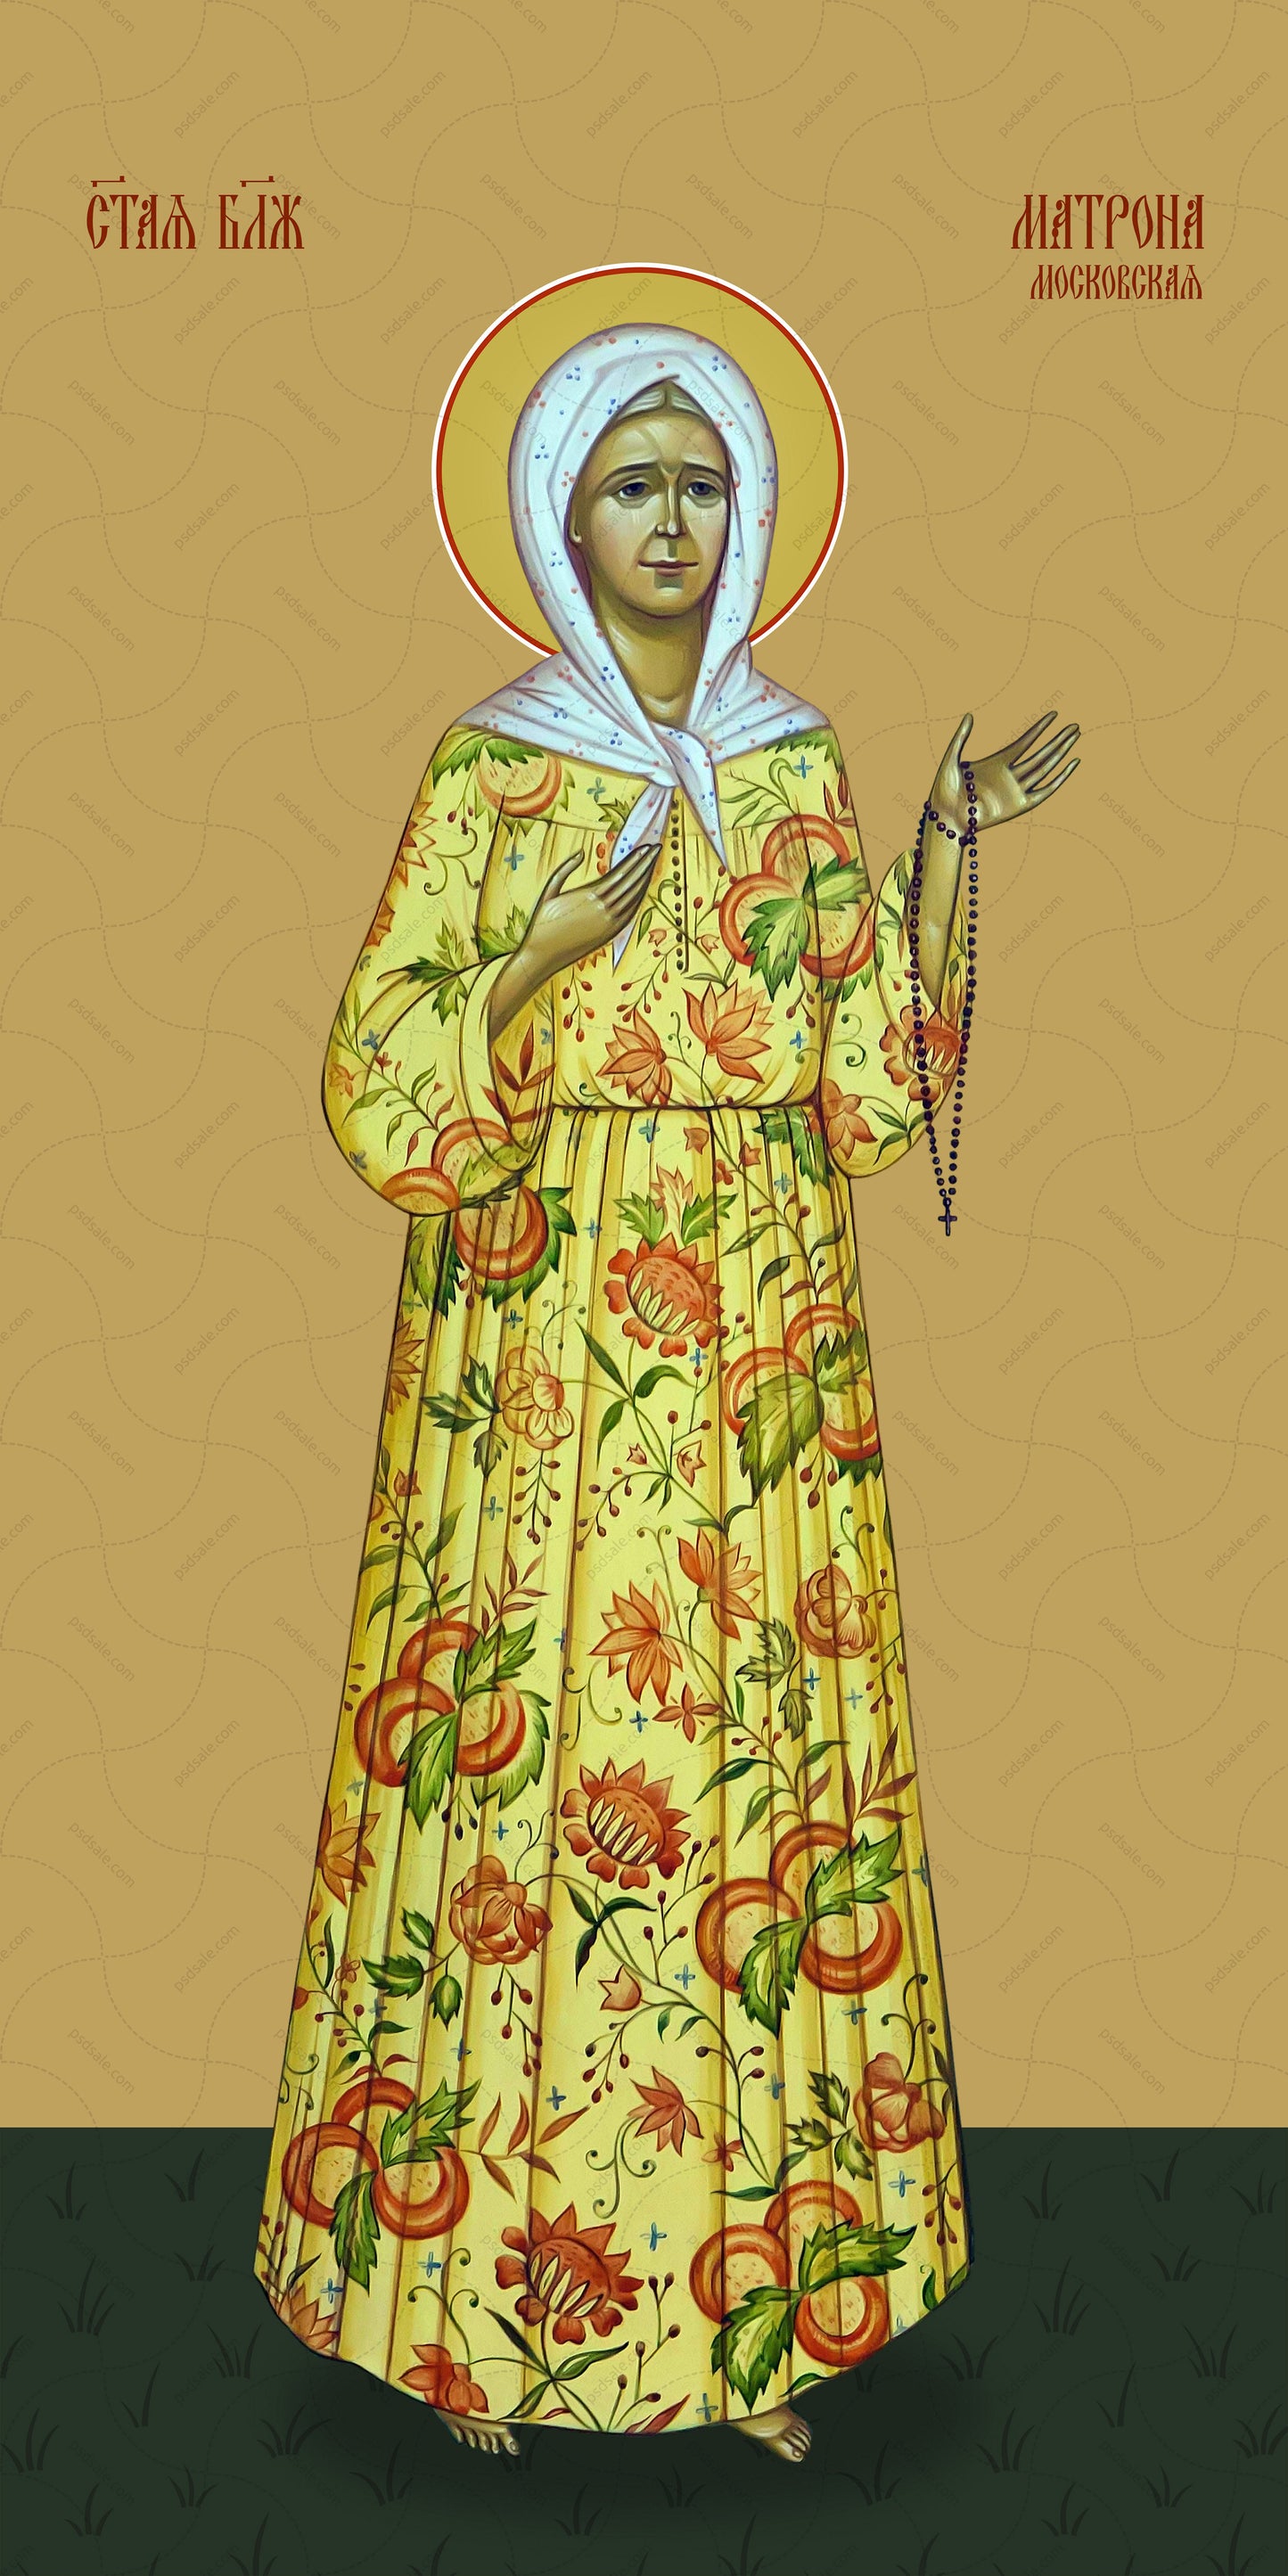 Matrona of Moscow, blessed saint